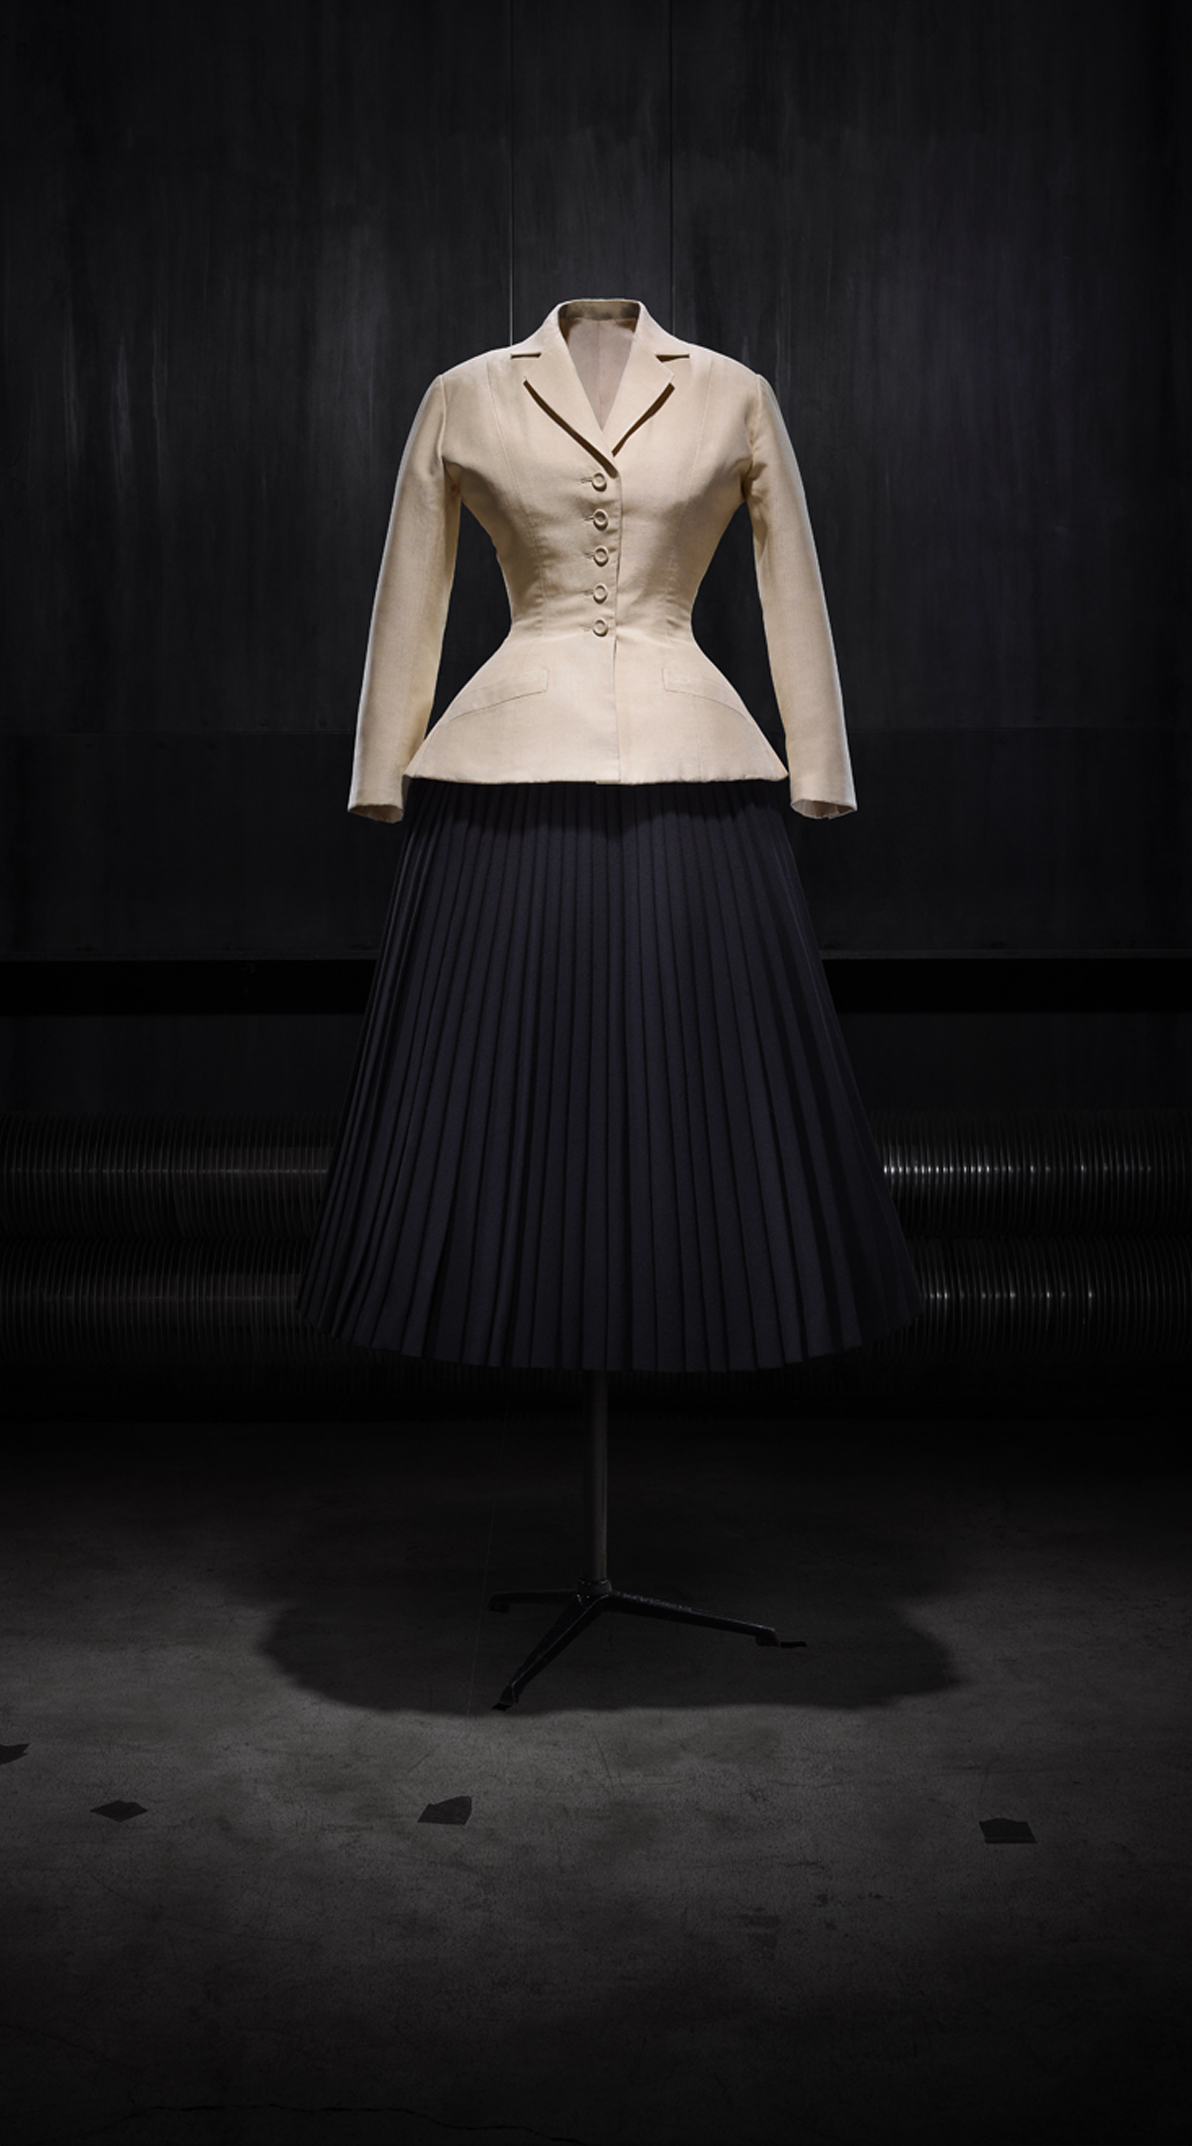 How Christian Dior's Collections Embodies 5 Elements of Fashion